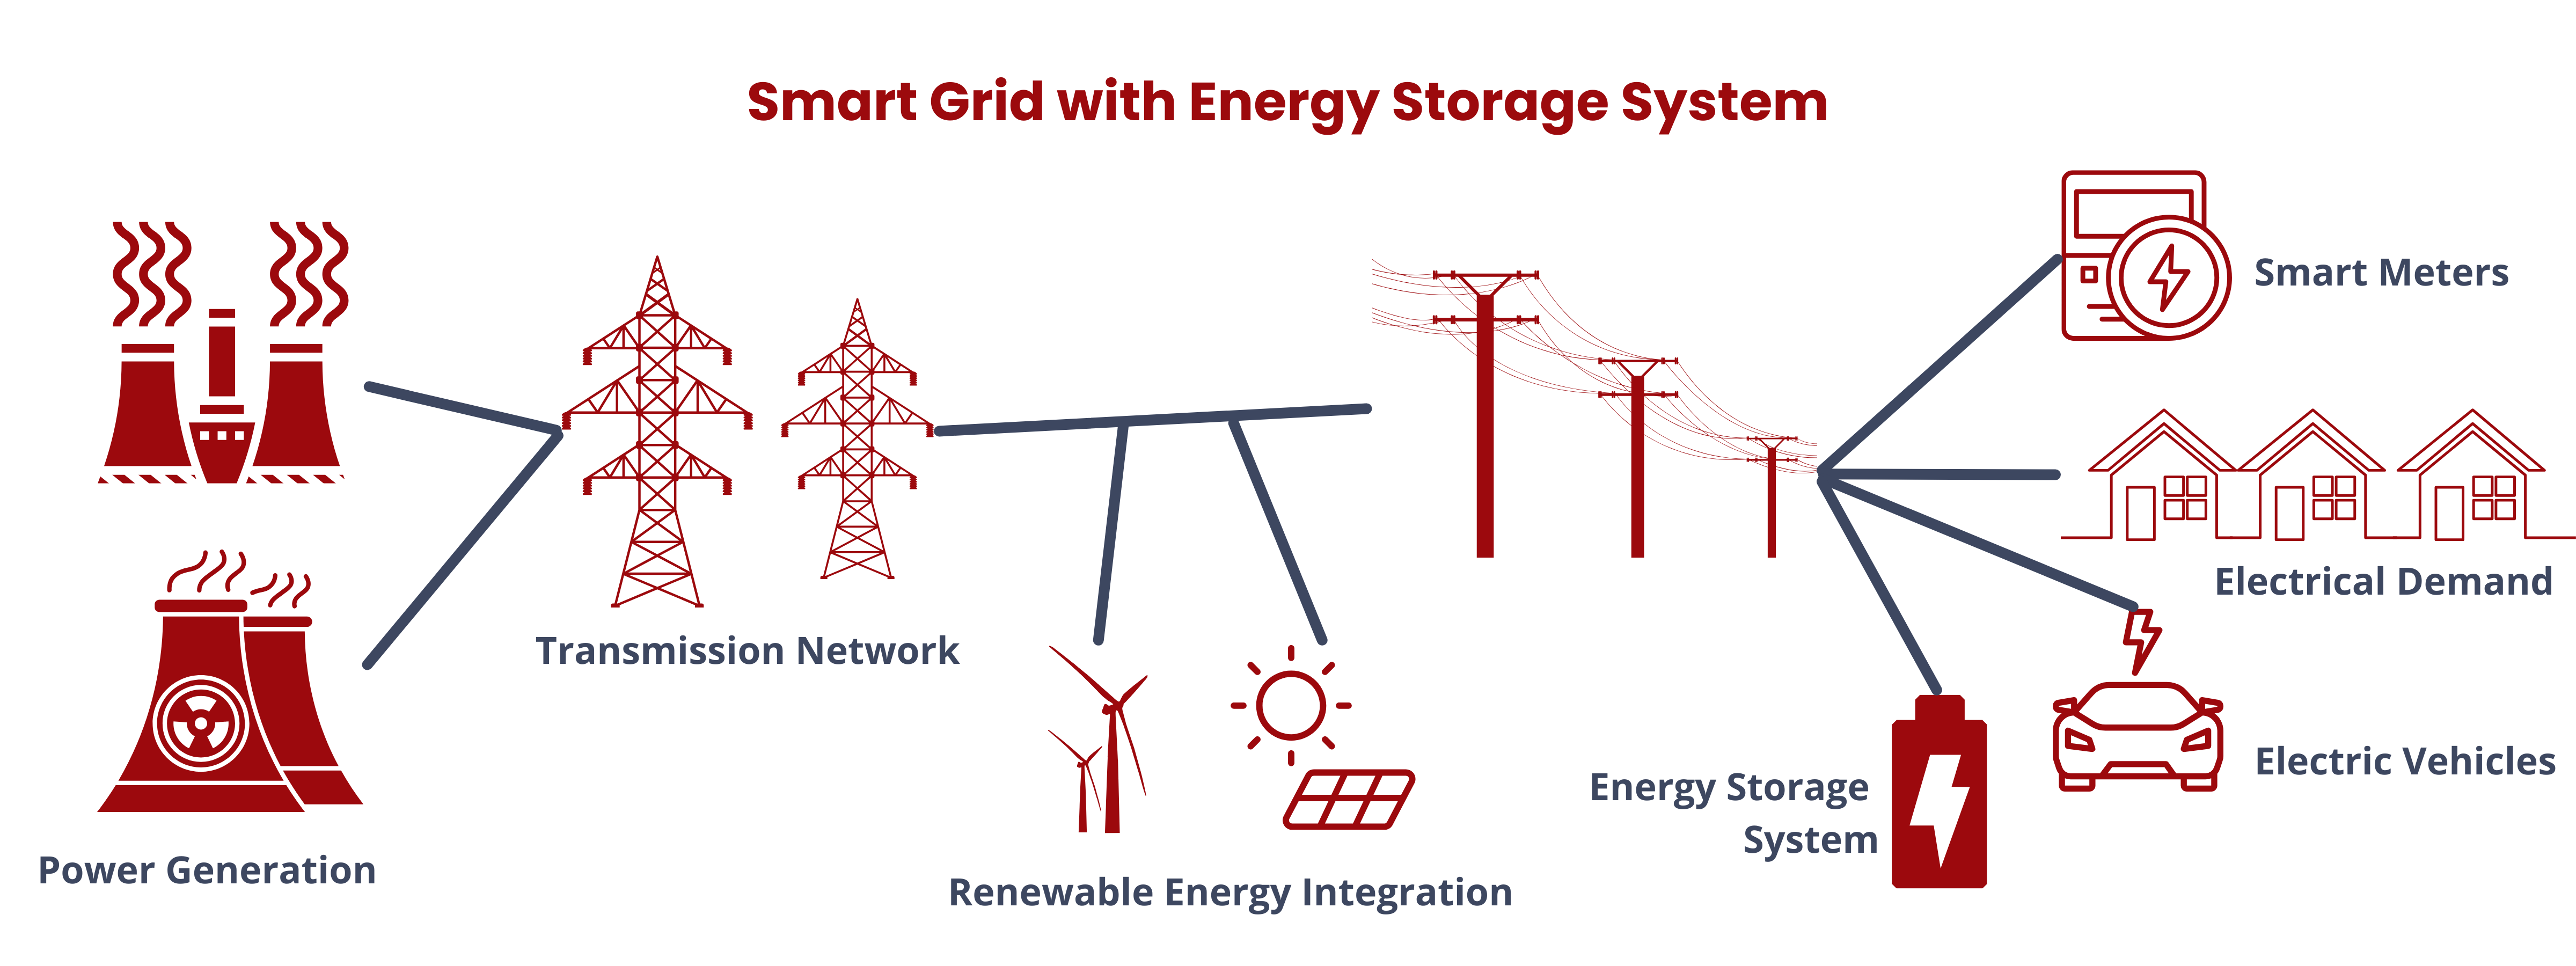 Smart Grid with Energy Storage System